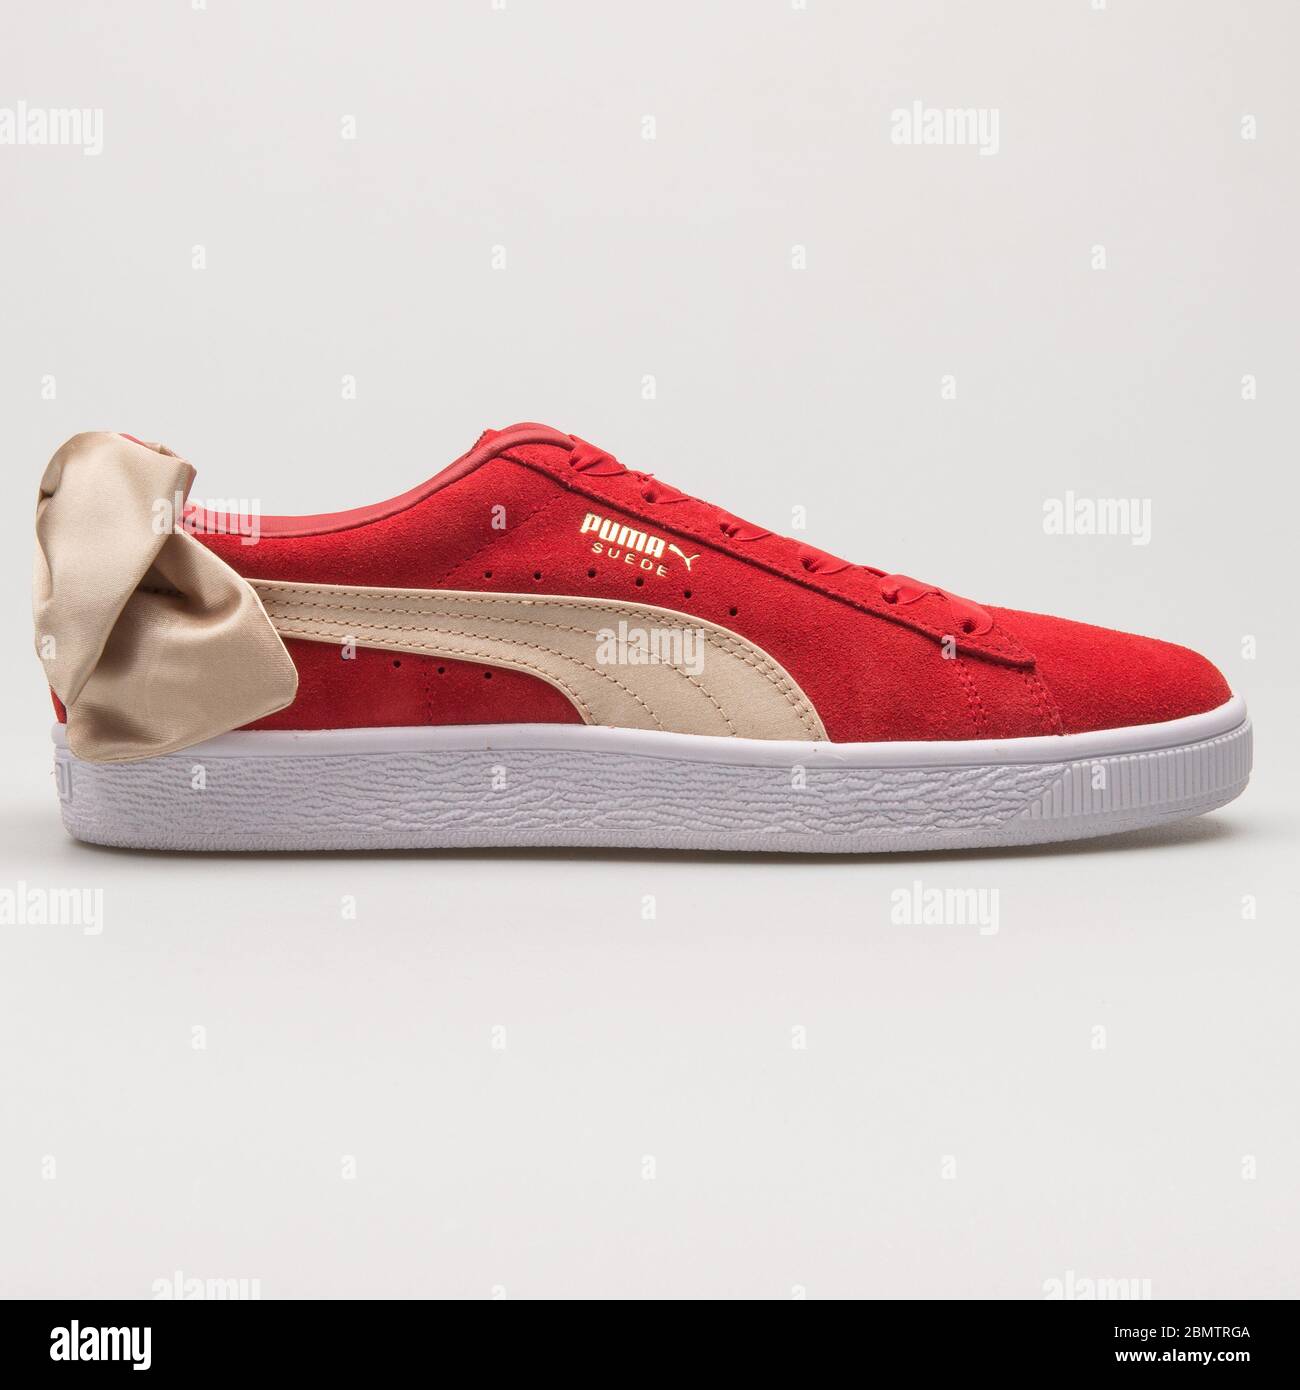 VIENNA, AUSTRIA - MAY 27, 2018: Puma Suede Bow Varsity red and gold sneaker  on white background Stock Photo - Alamy